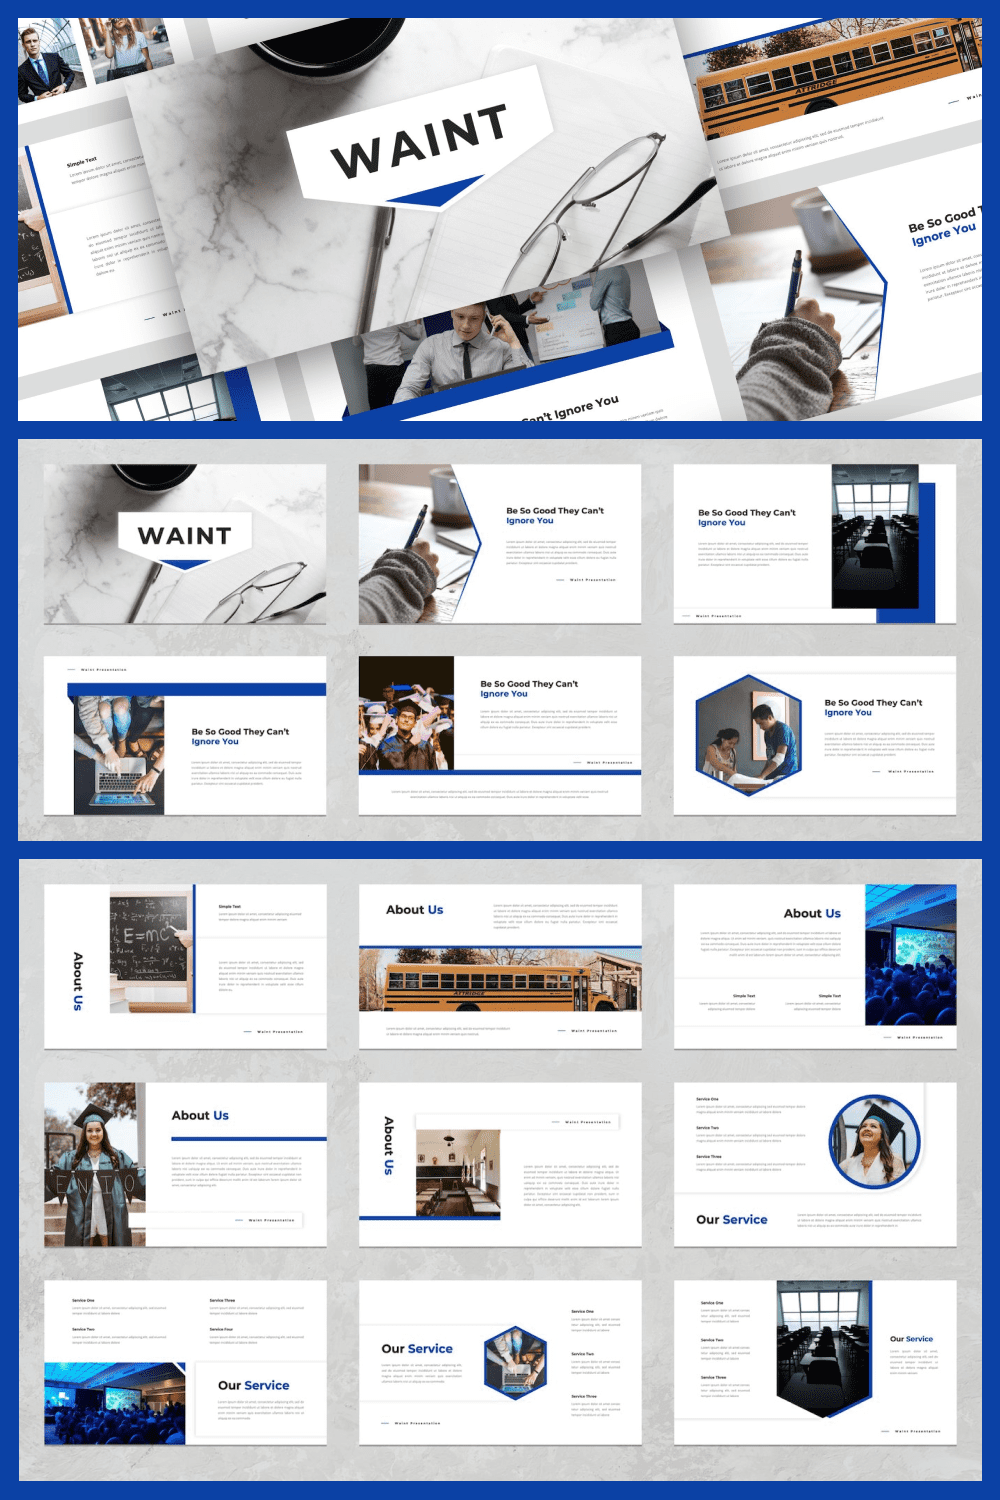 A light template with blue borders will perfectly describe your chosen theme.